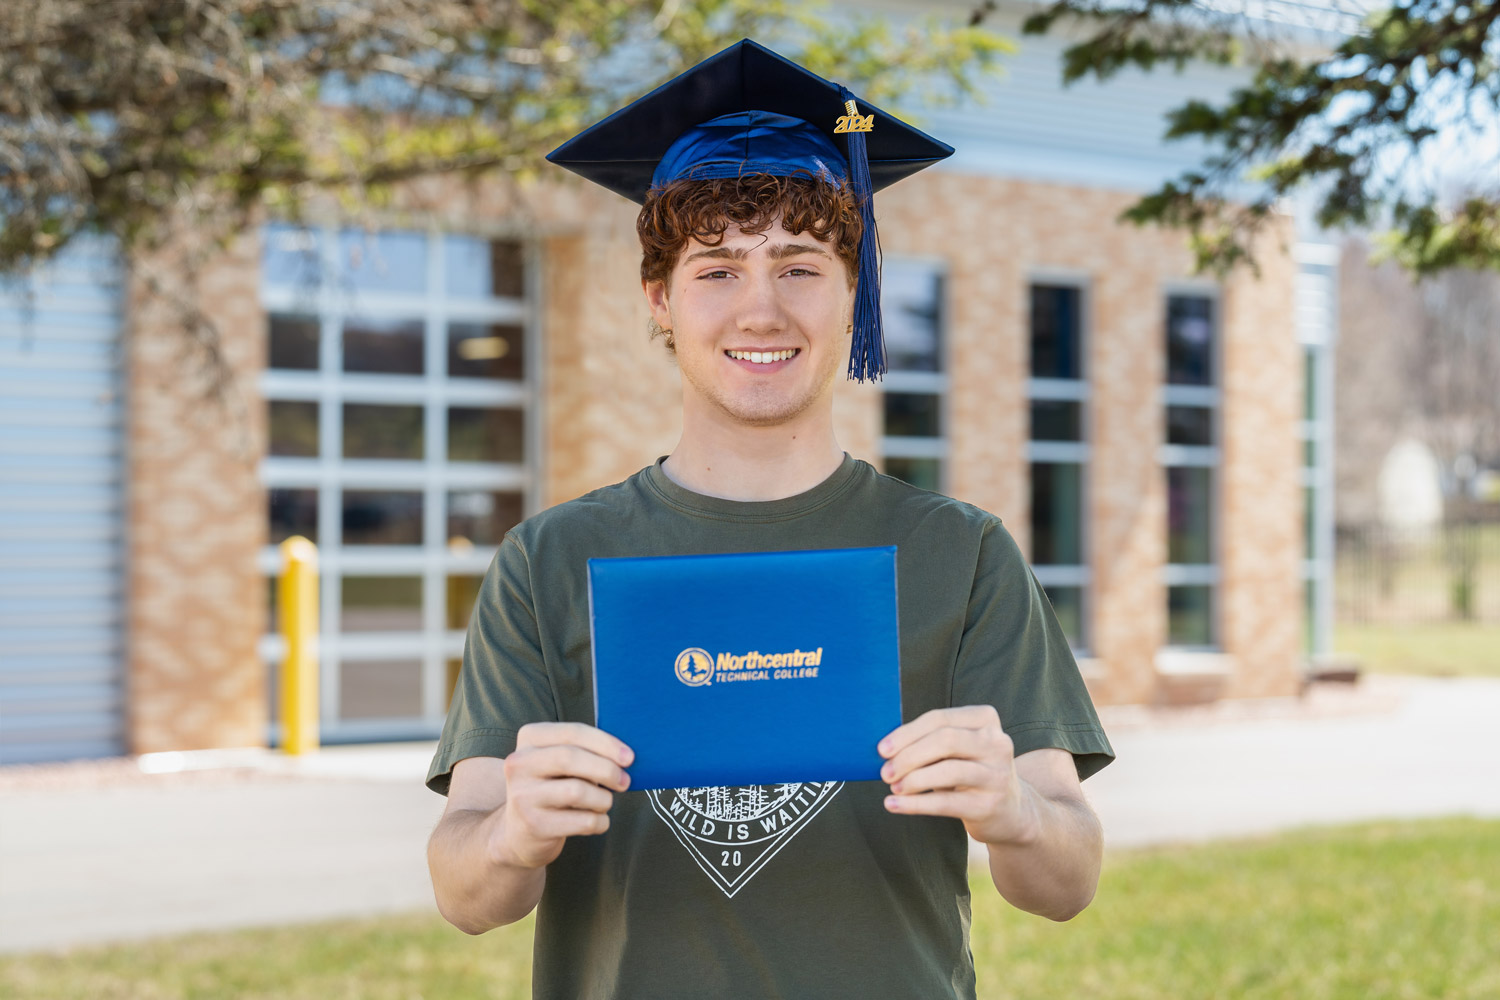 Aiden posing while wearing an NTC graduation cap and holding his diploma.